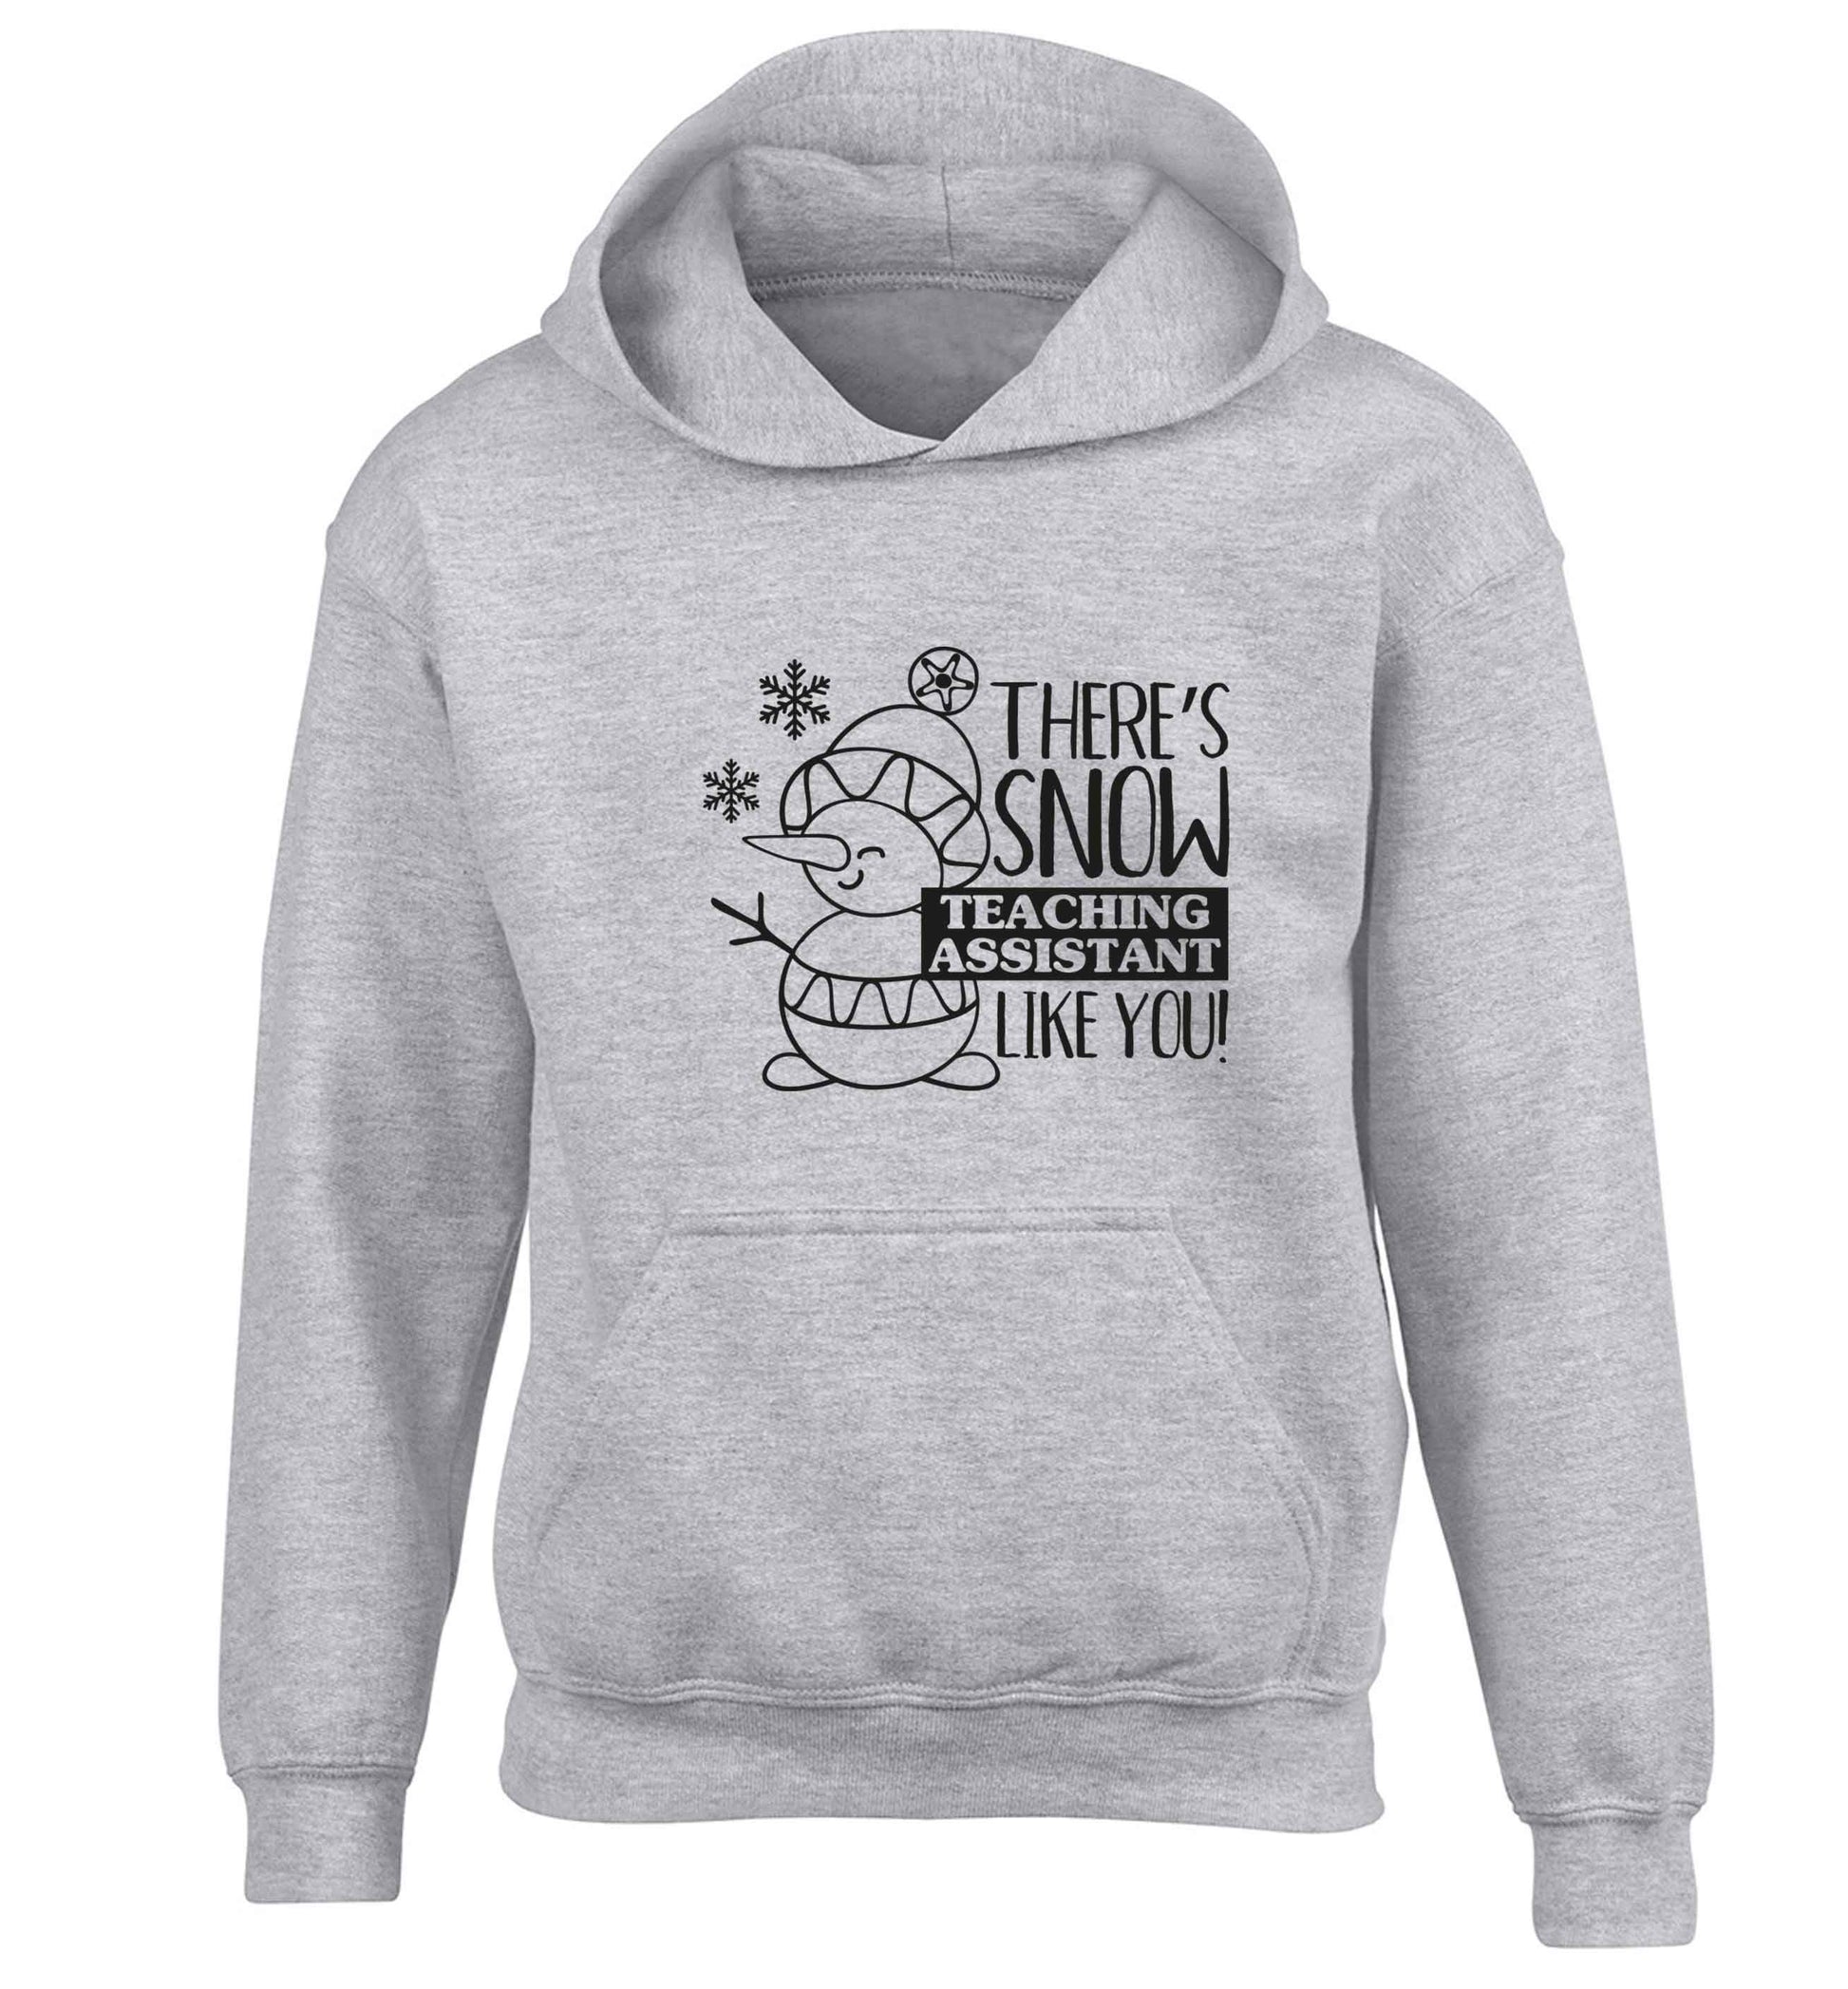 There's snow teaching assistant like you children's grey hoodie 12-13 Years